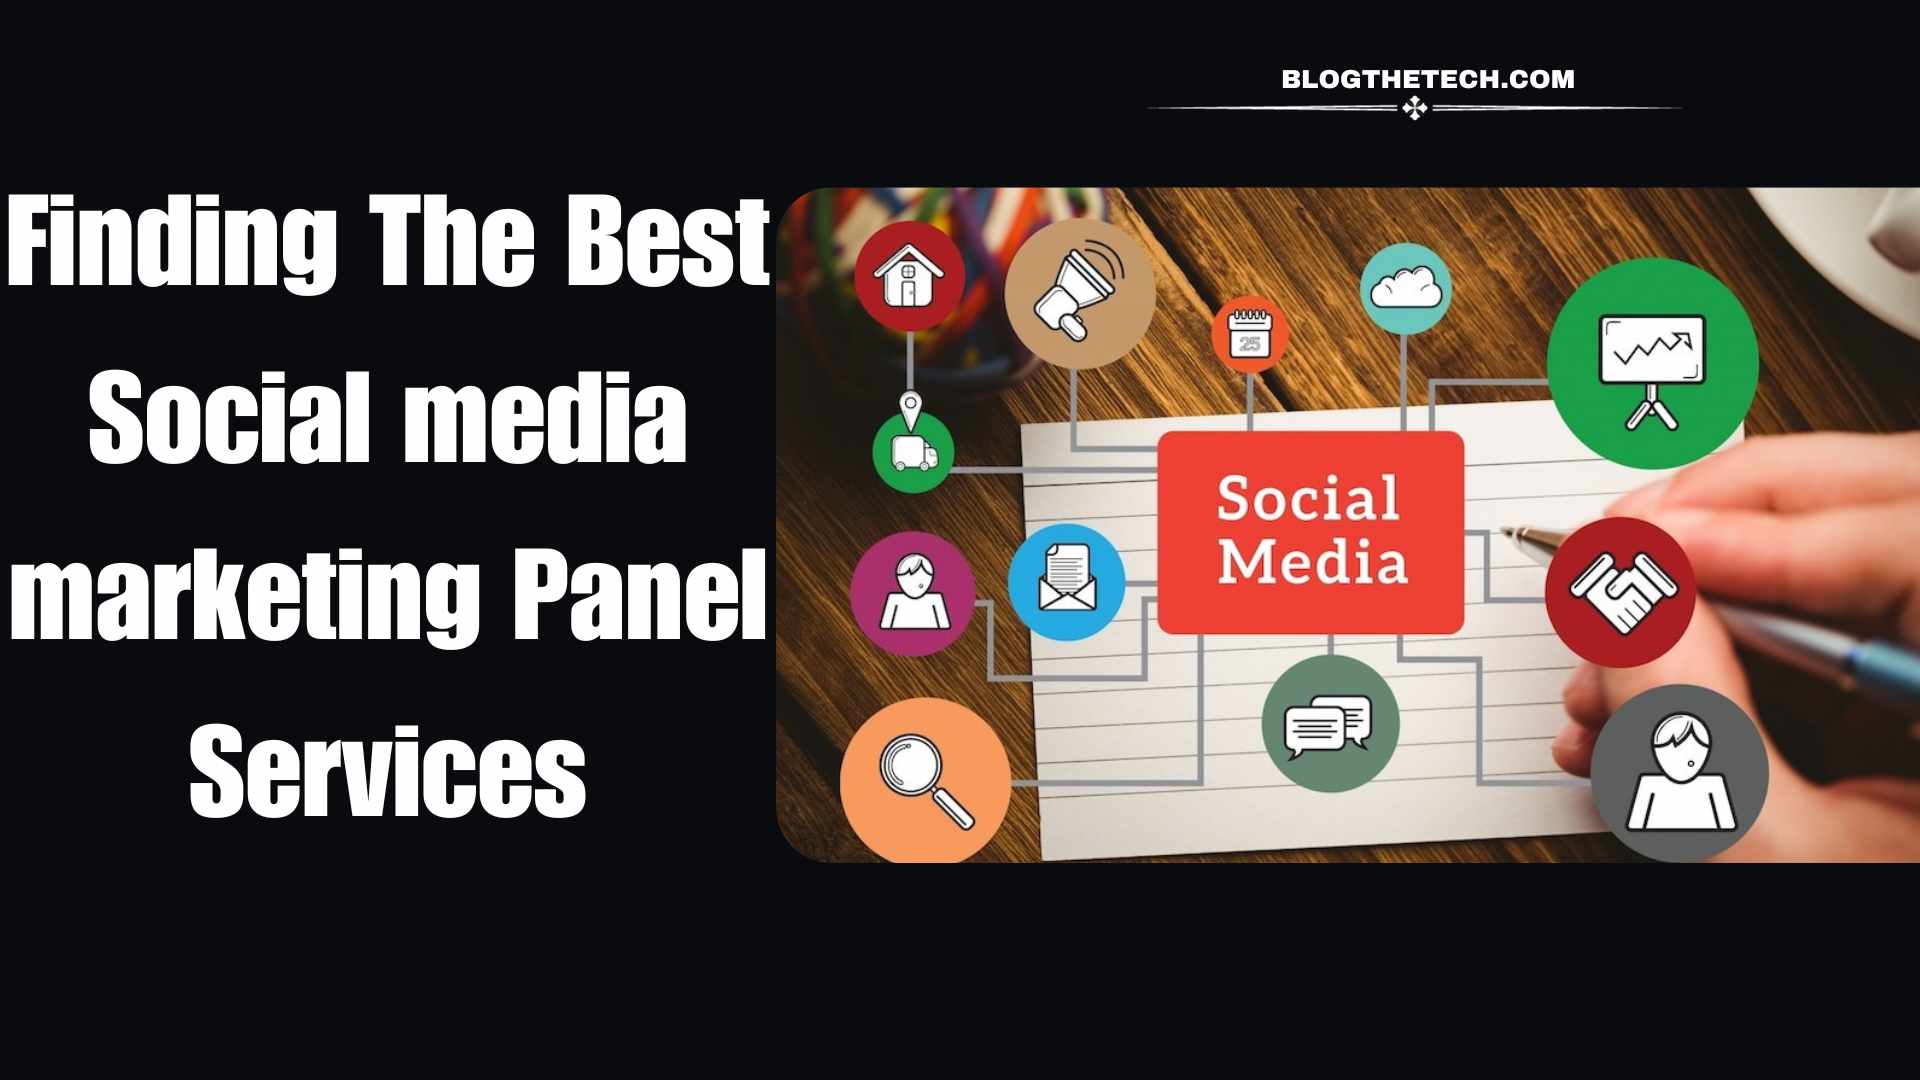 Finding The Best Social media marketing Panel Services (SMM panel)